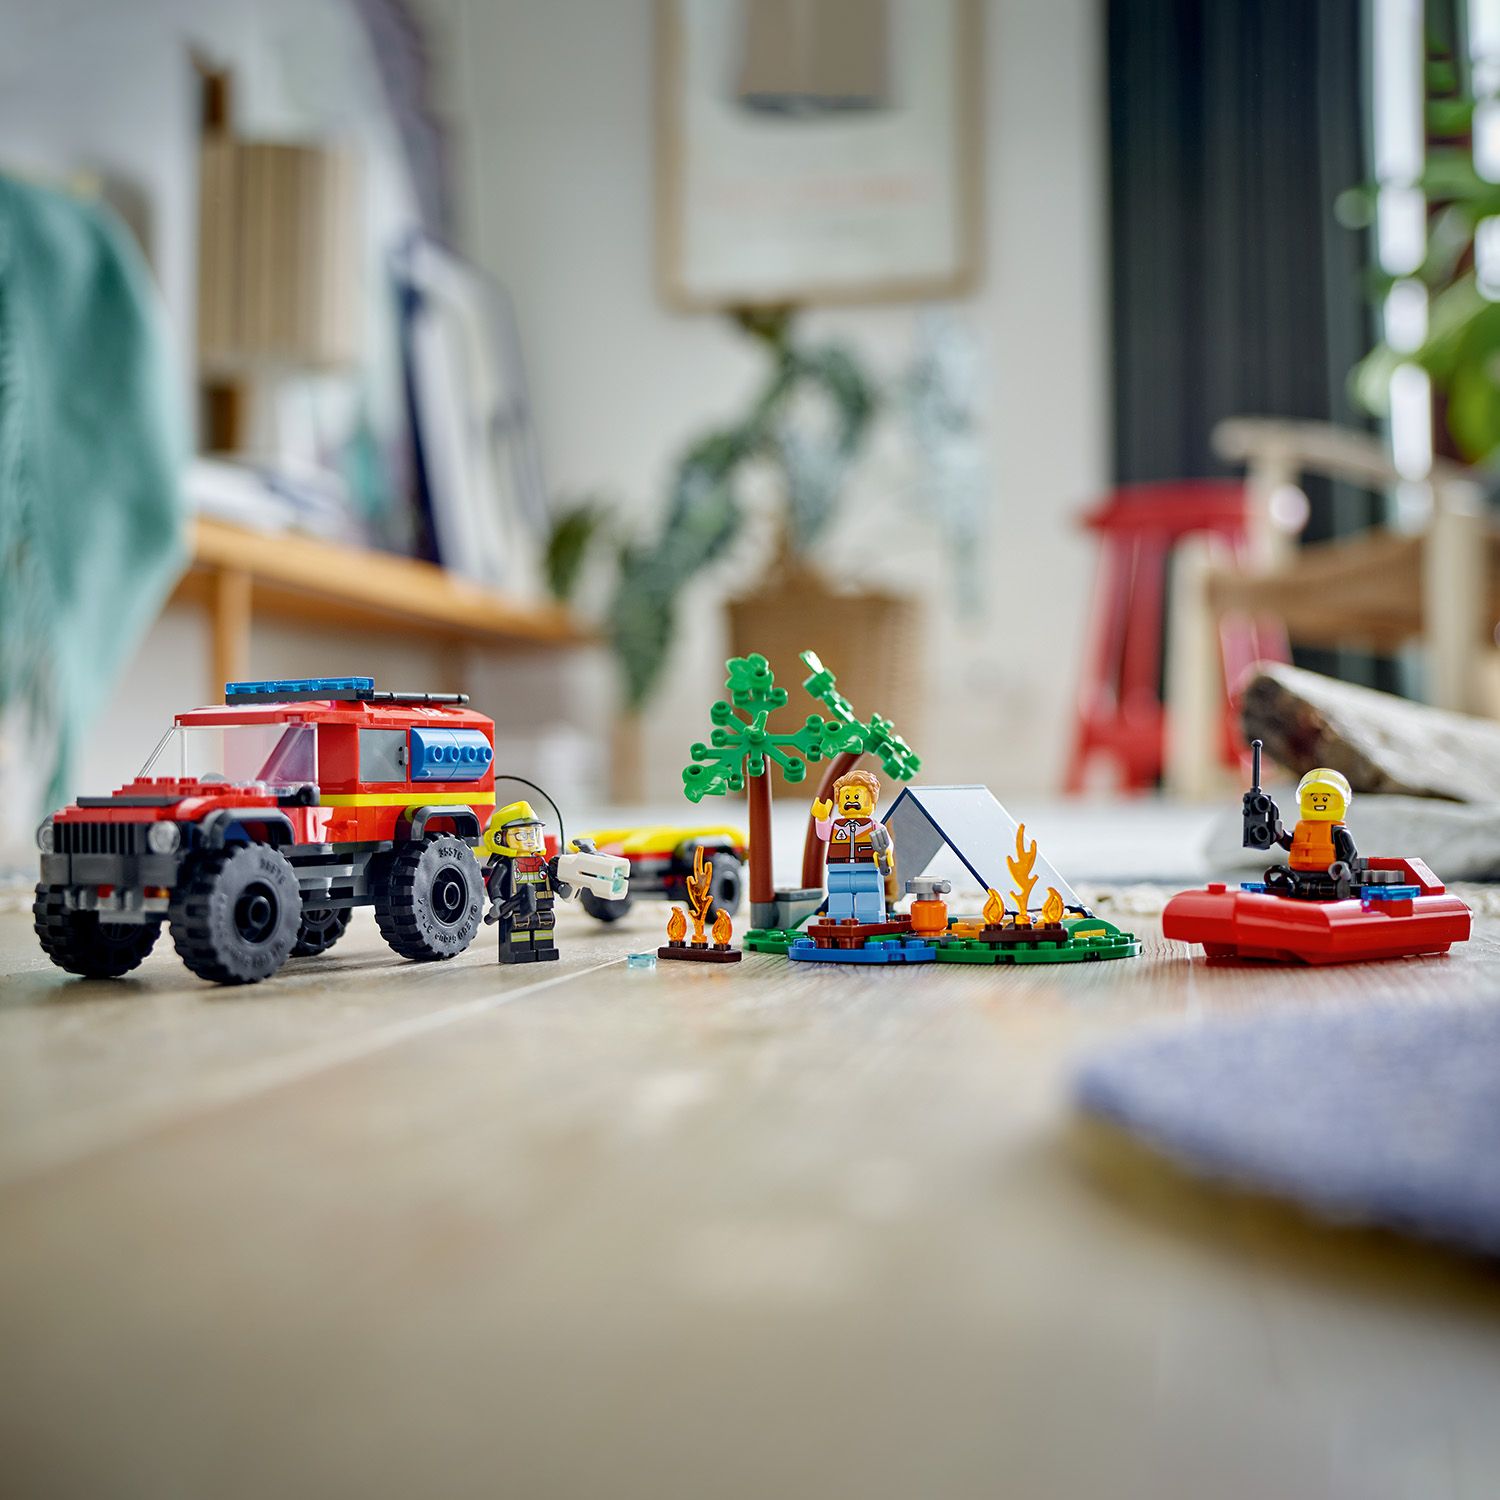 A LEGO® gift for imaginative play